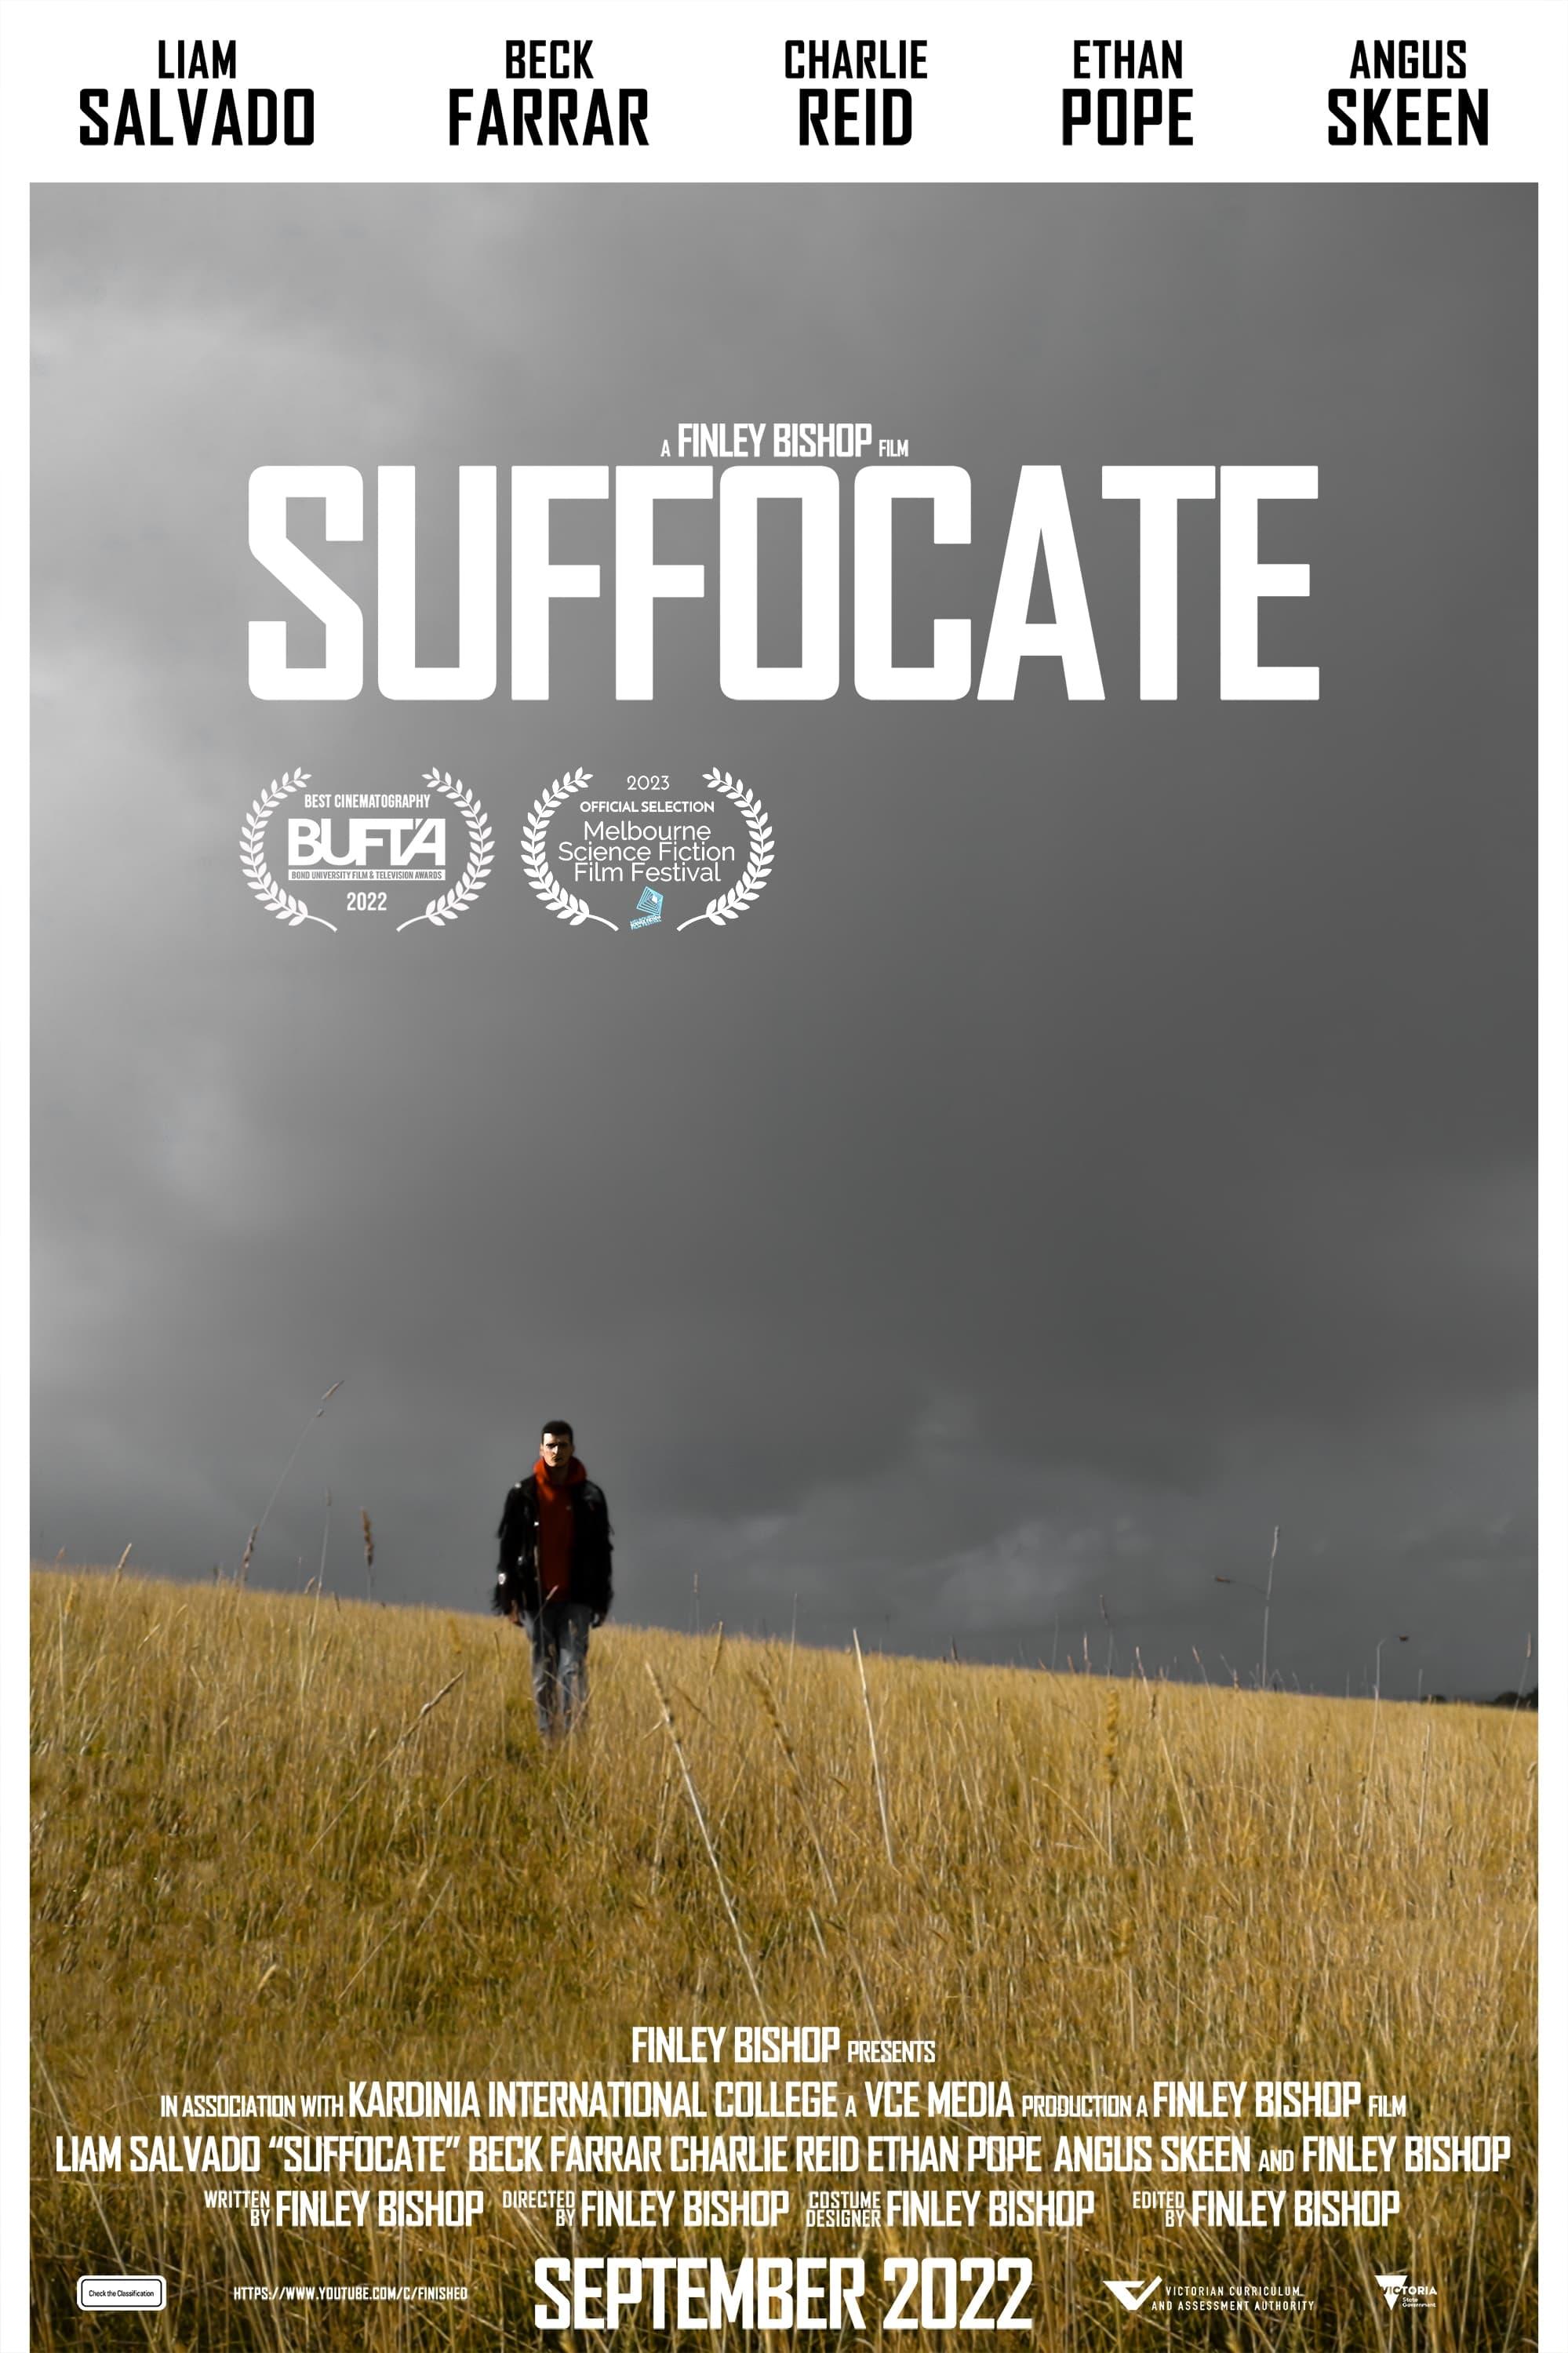 Suffocate poster